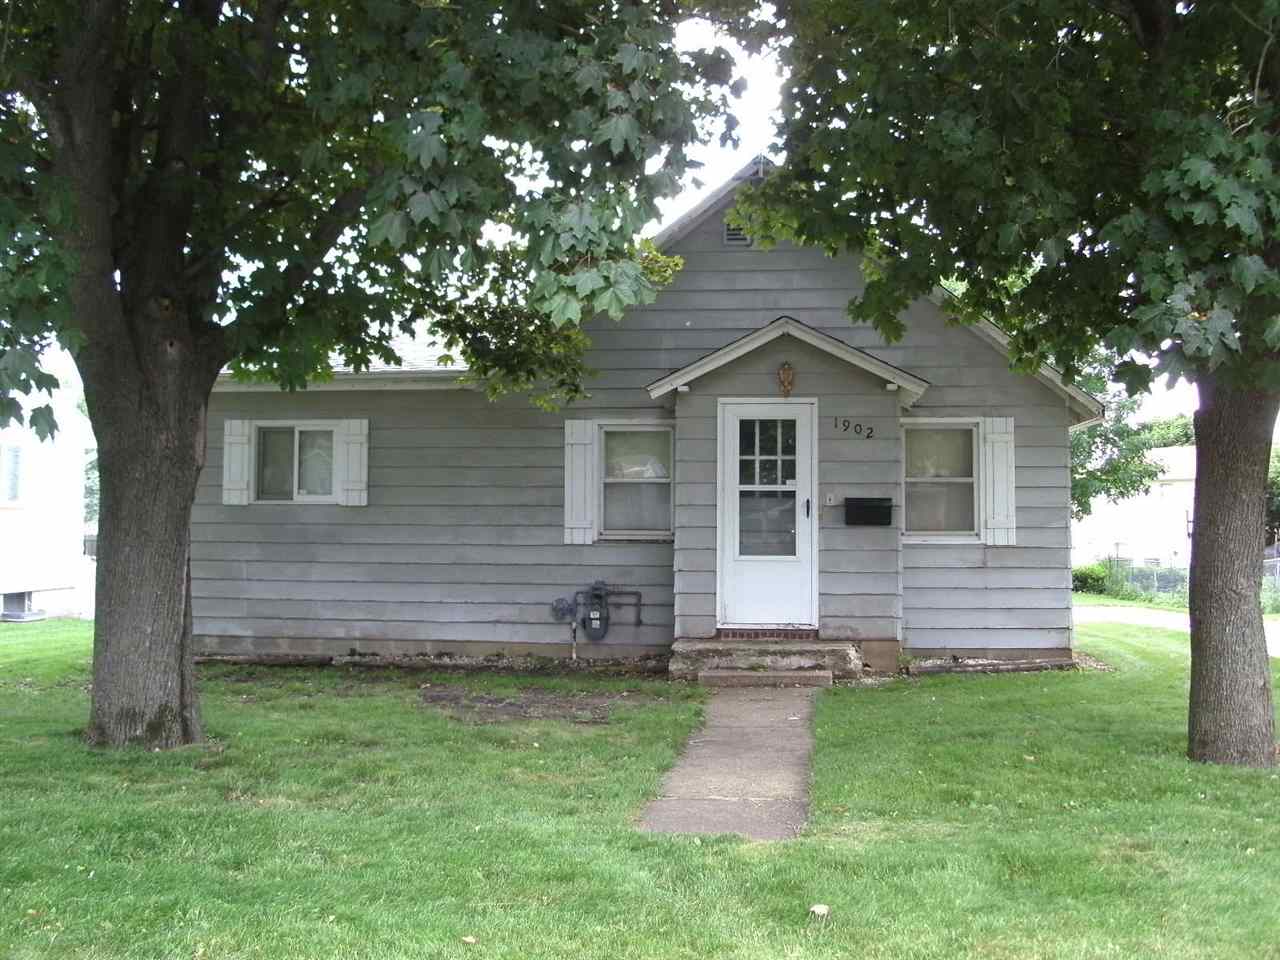 1902 N 6th St, Estherville, IA 51334 